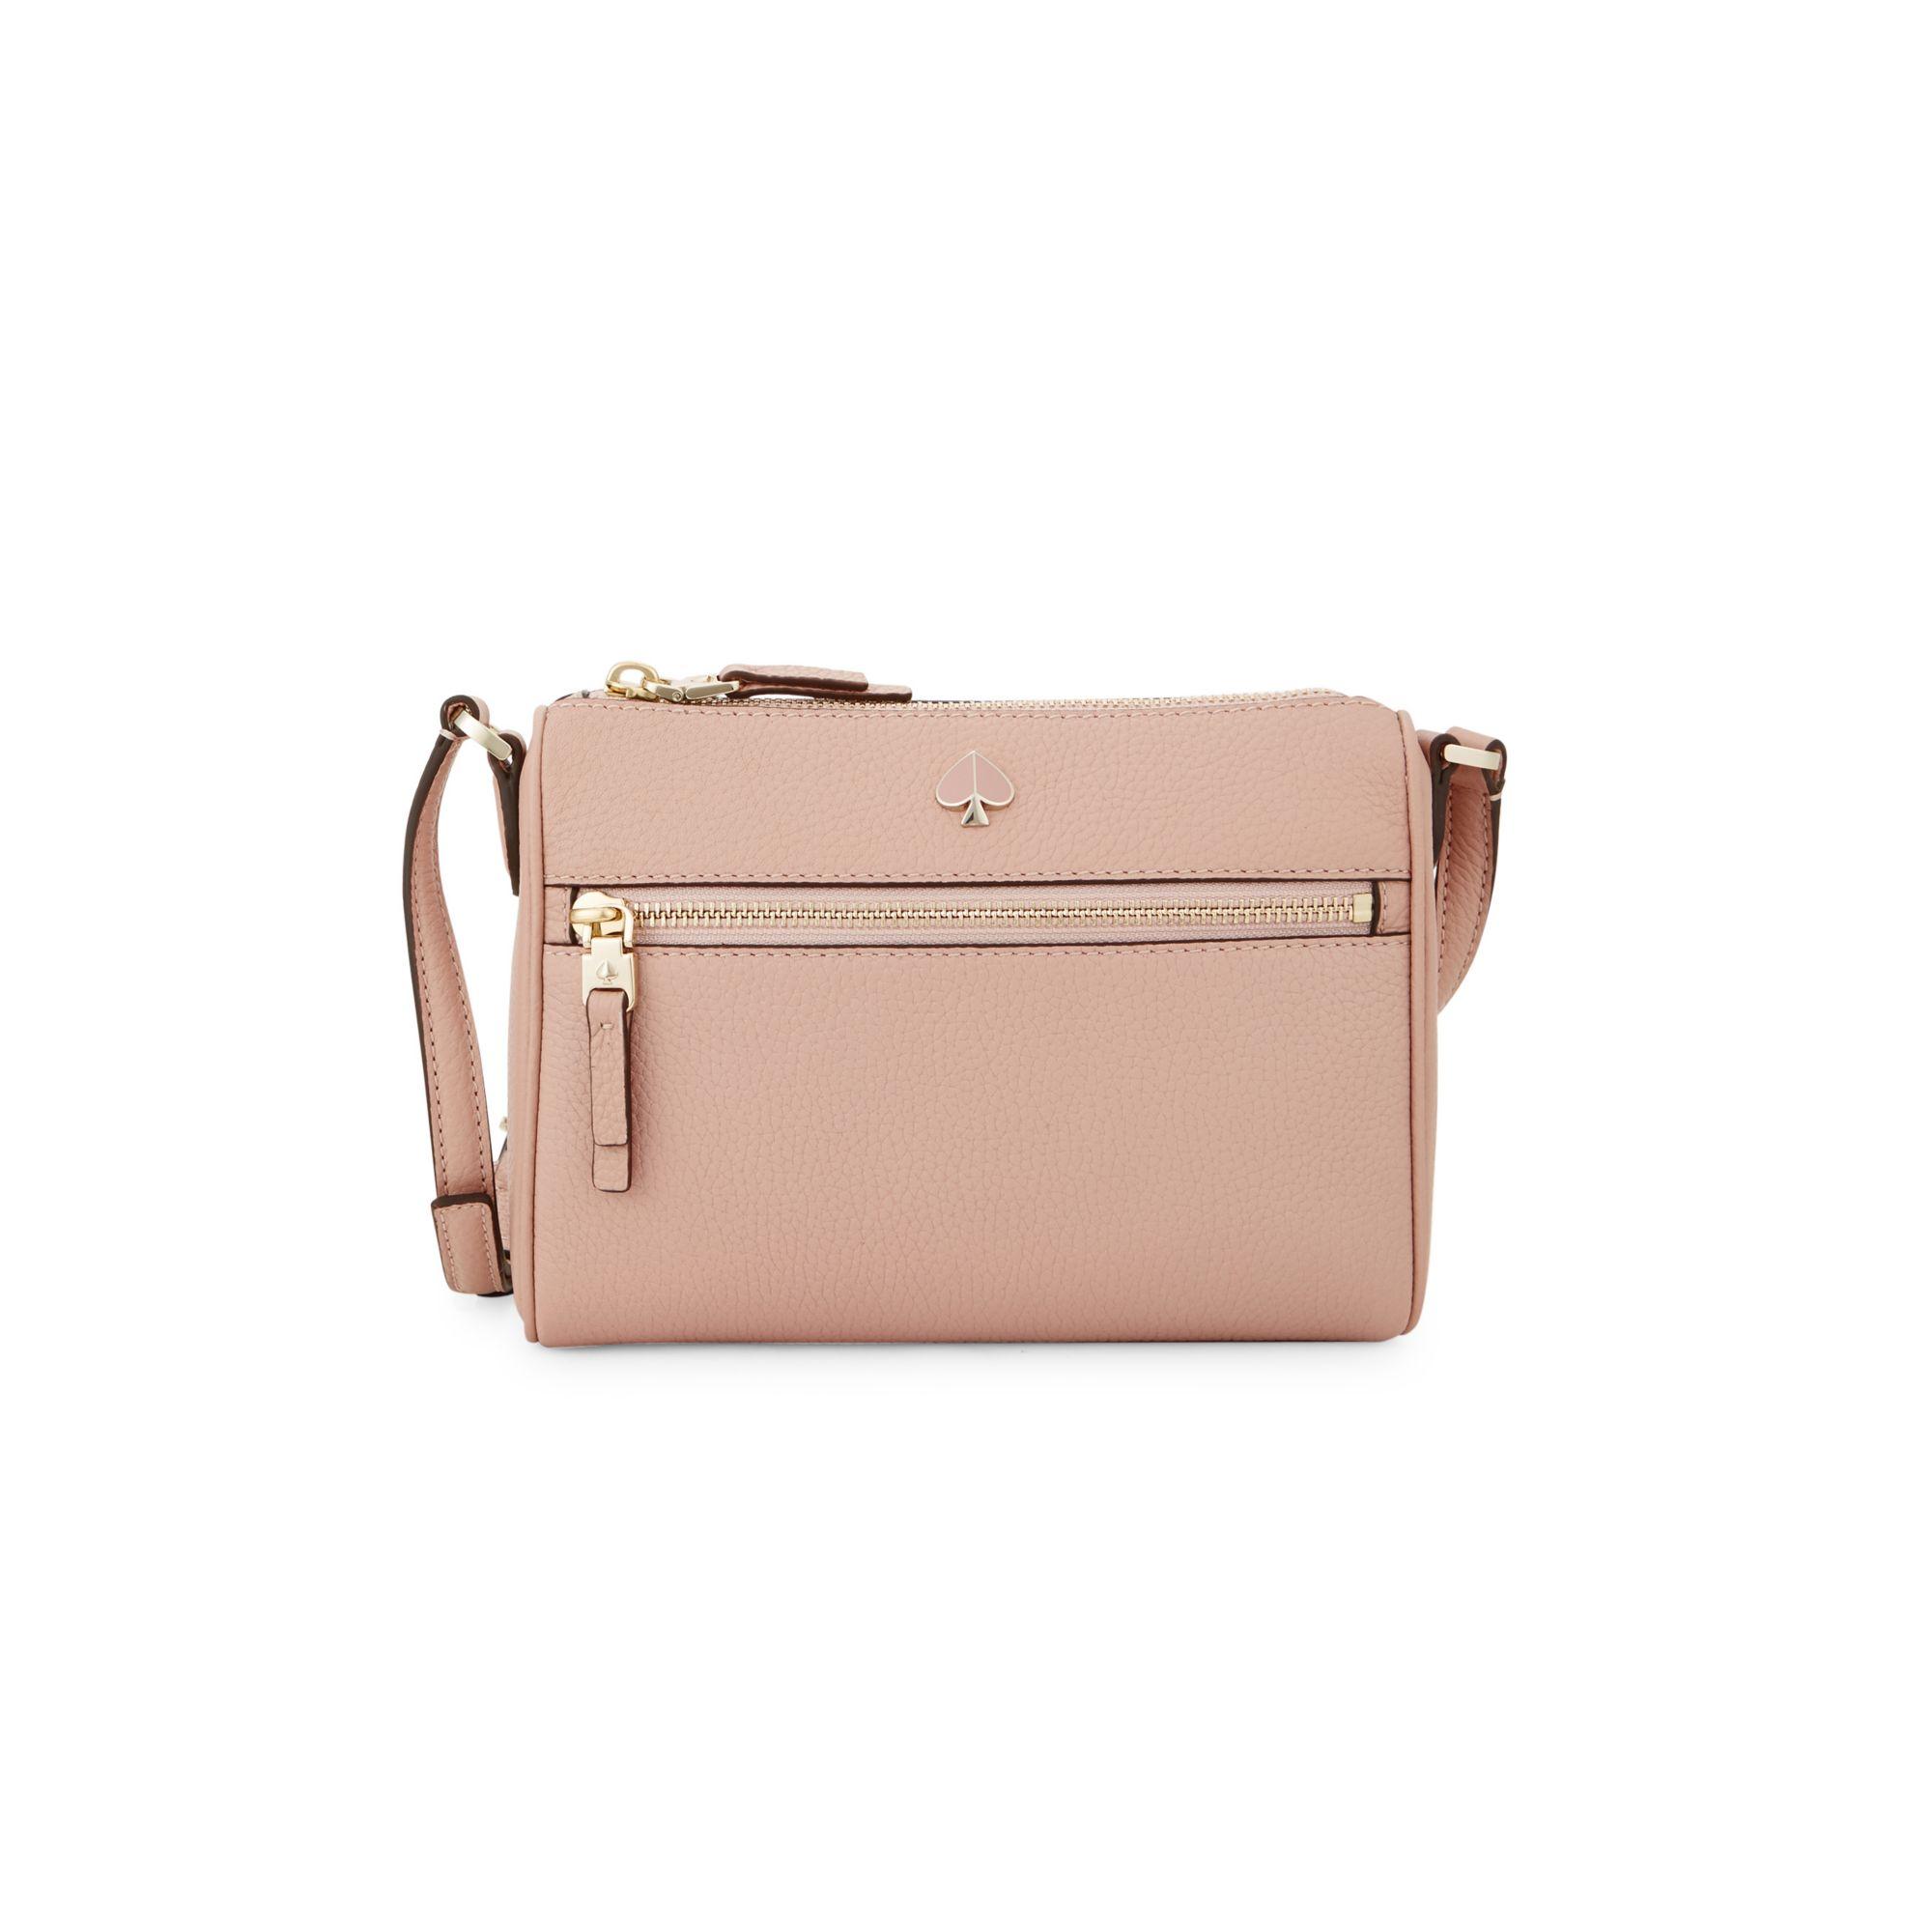 Kate Spade Small Polly Leather Crossbody Bag in Pink - Lyst